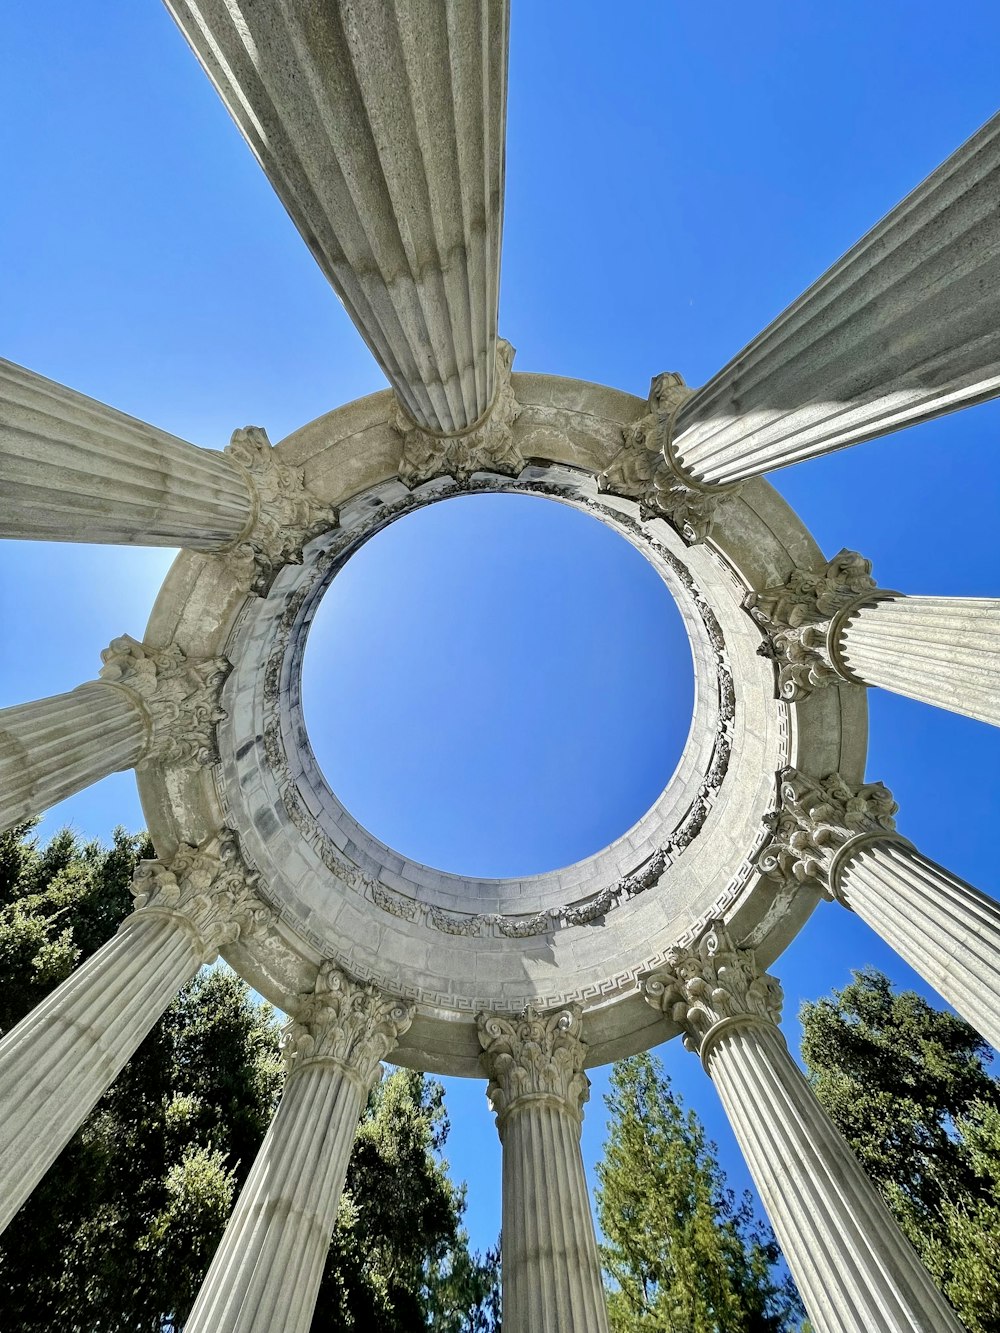 a circular structure with columns